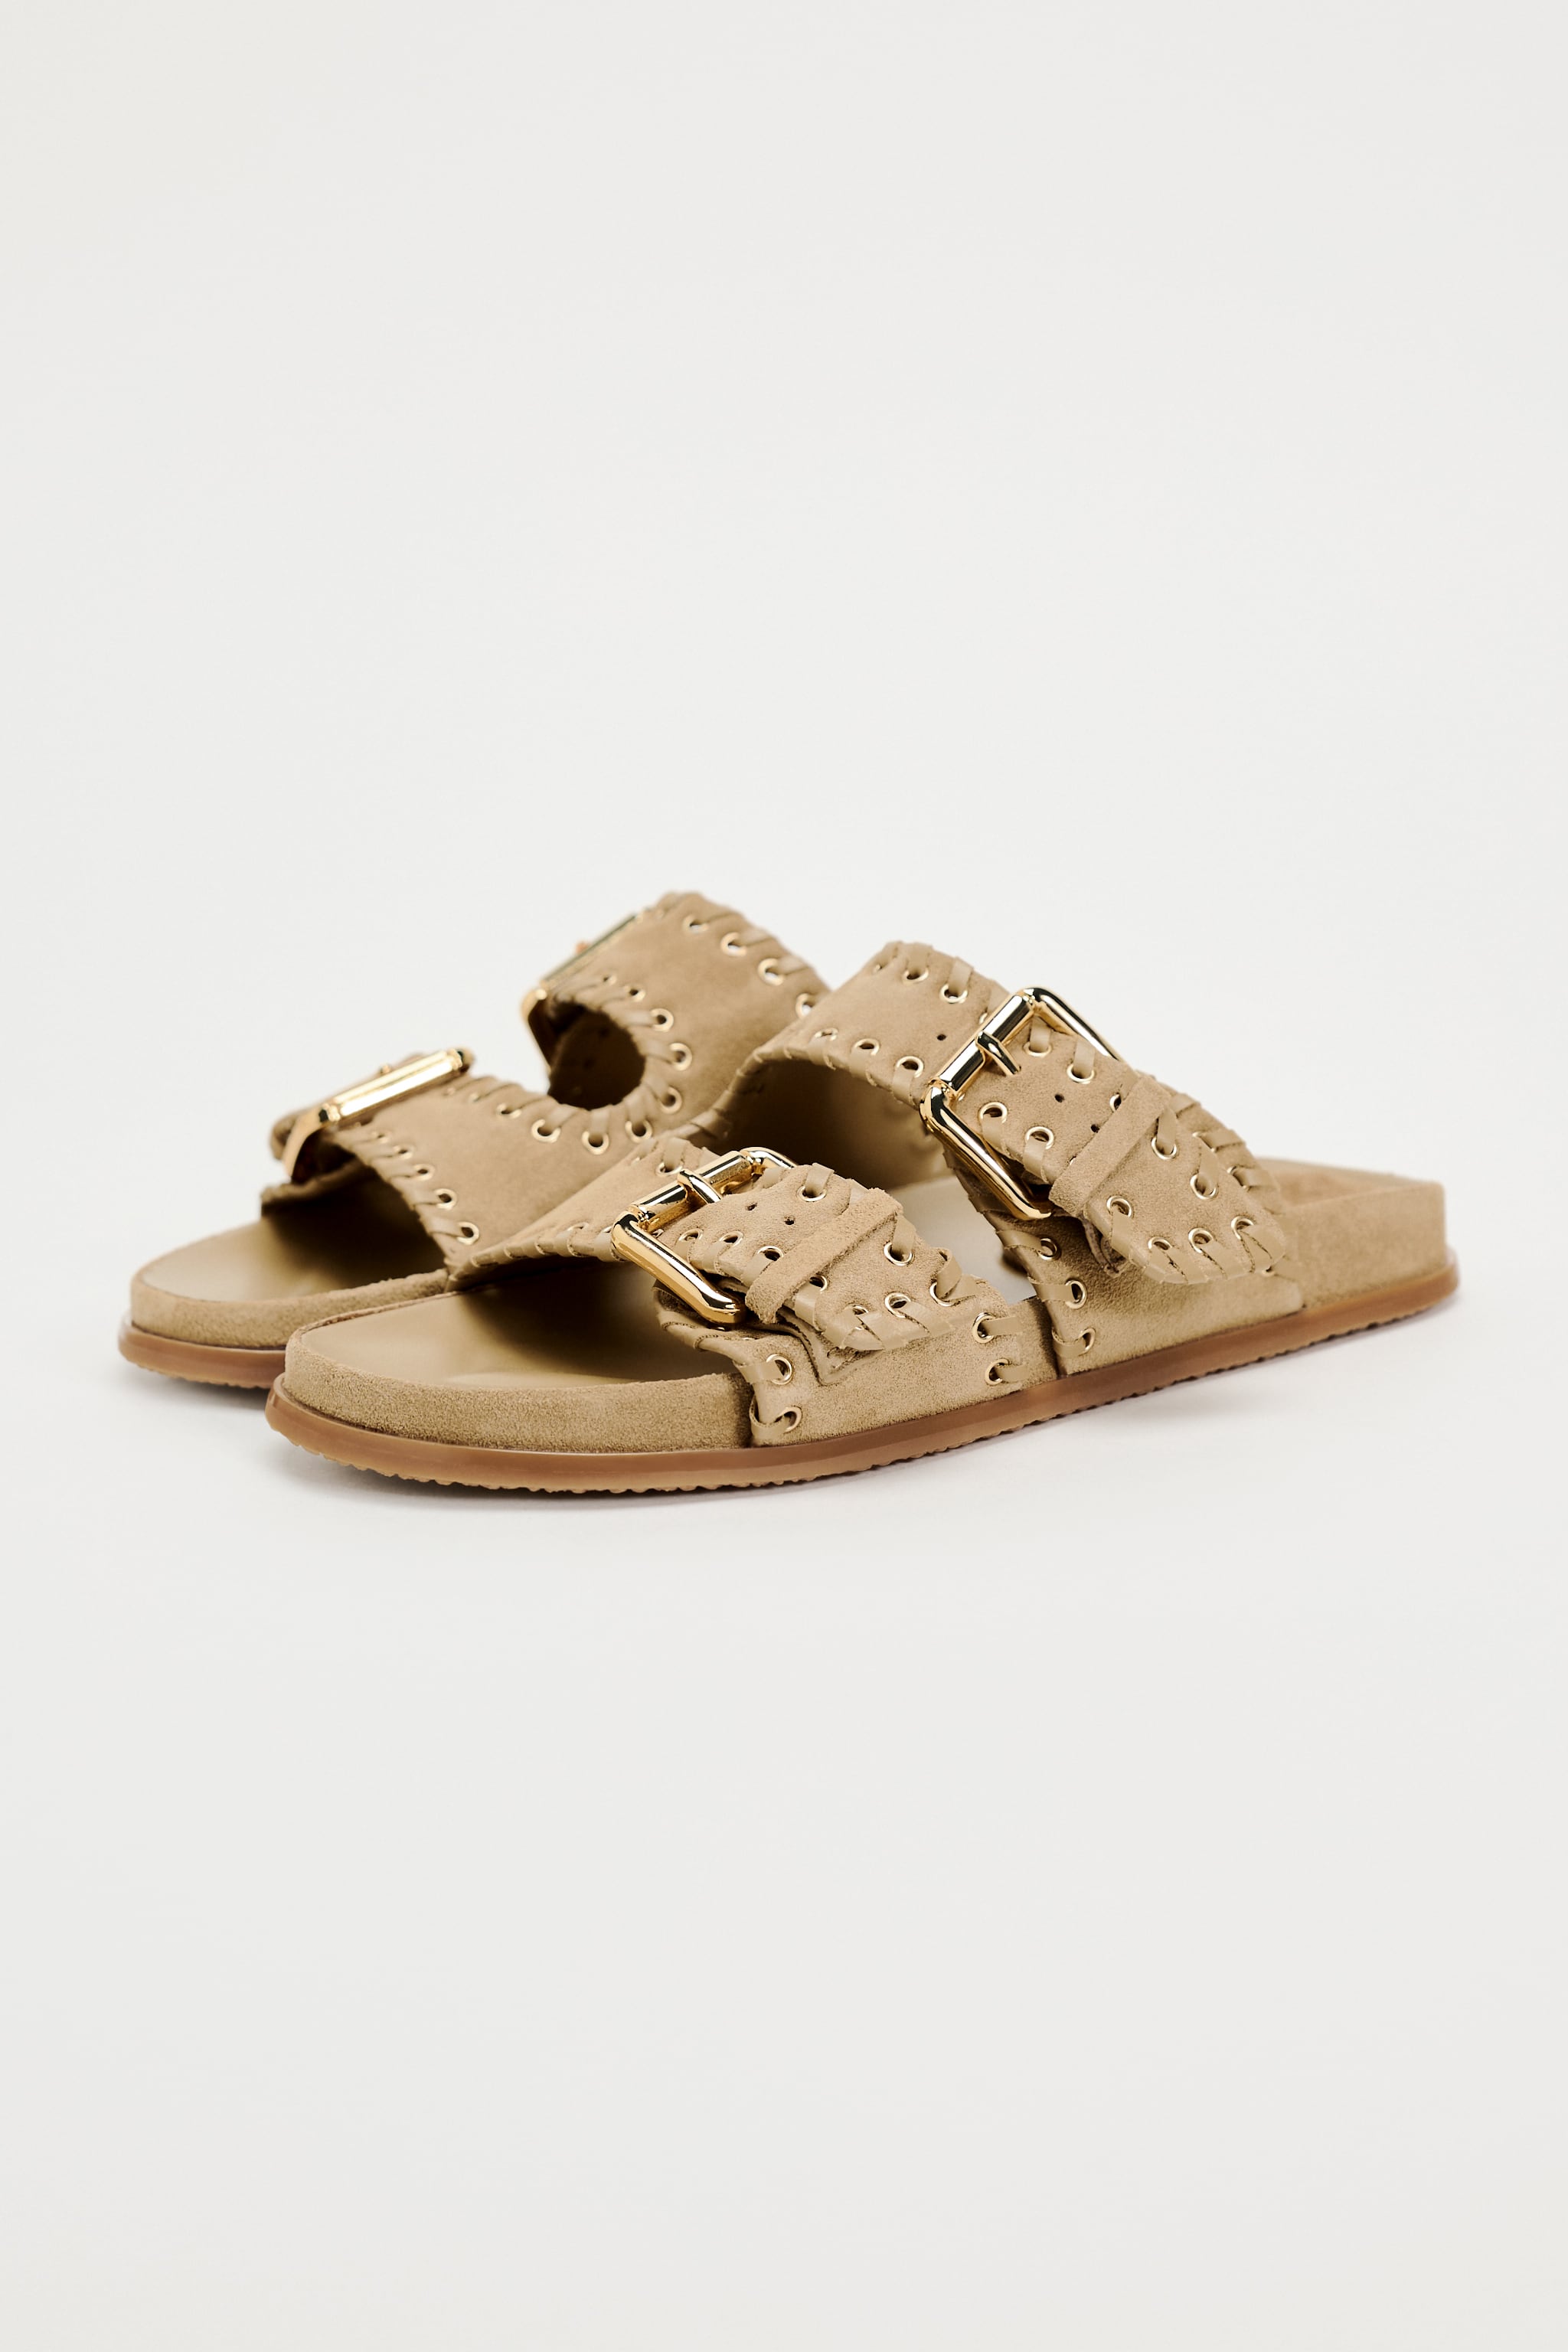 BUCKLED SUEDE SANDALS